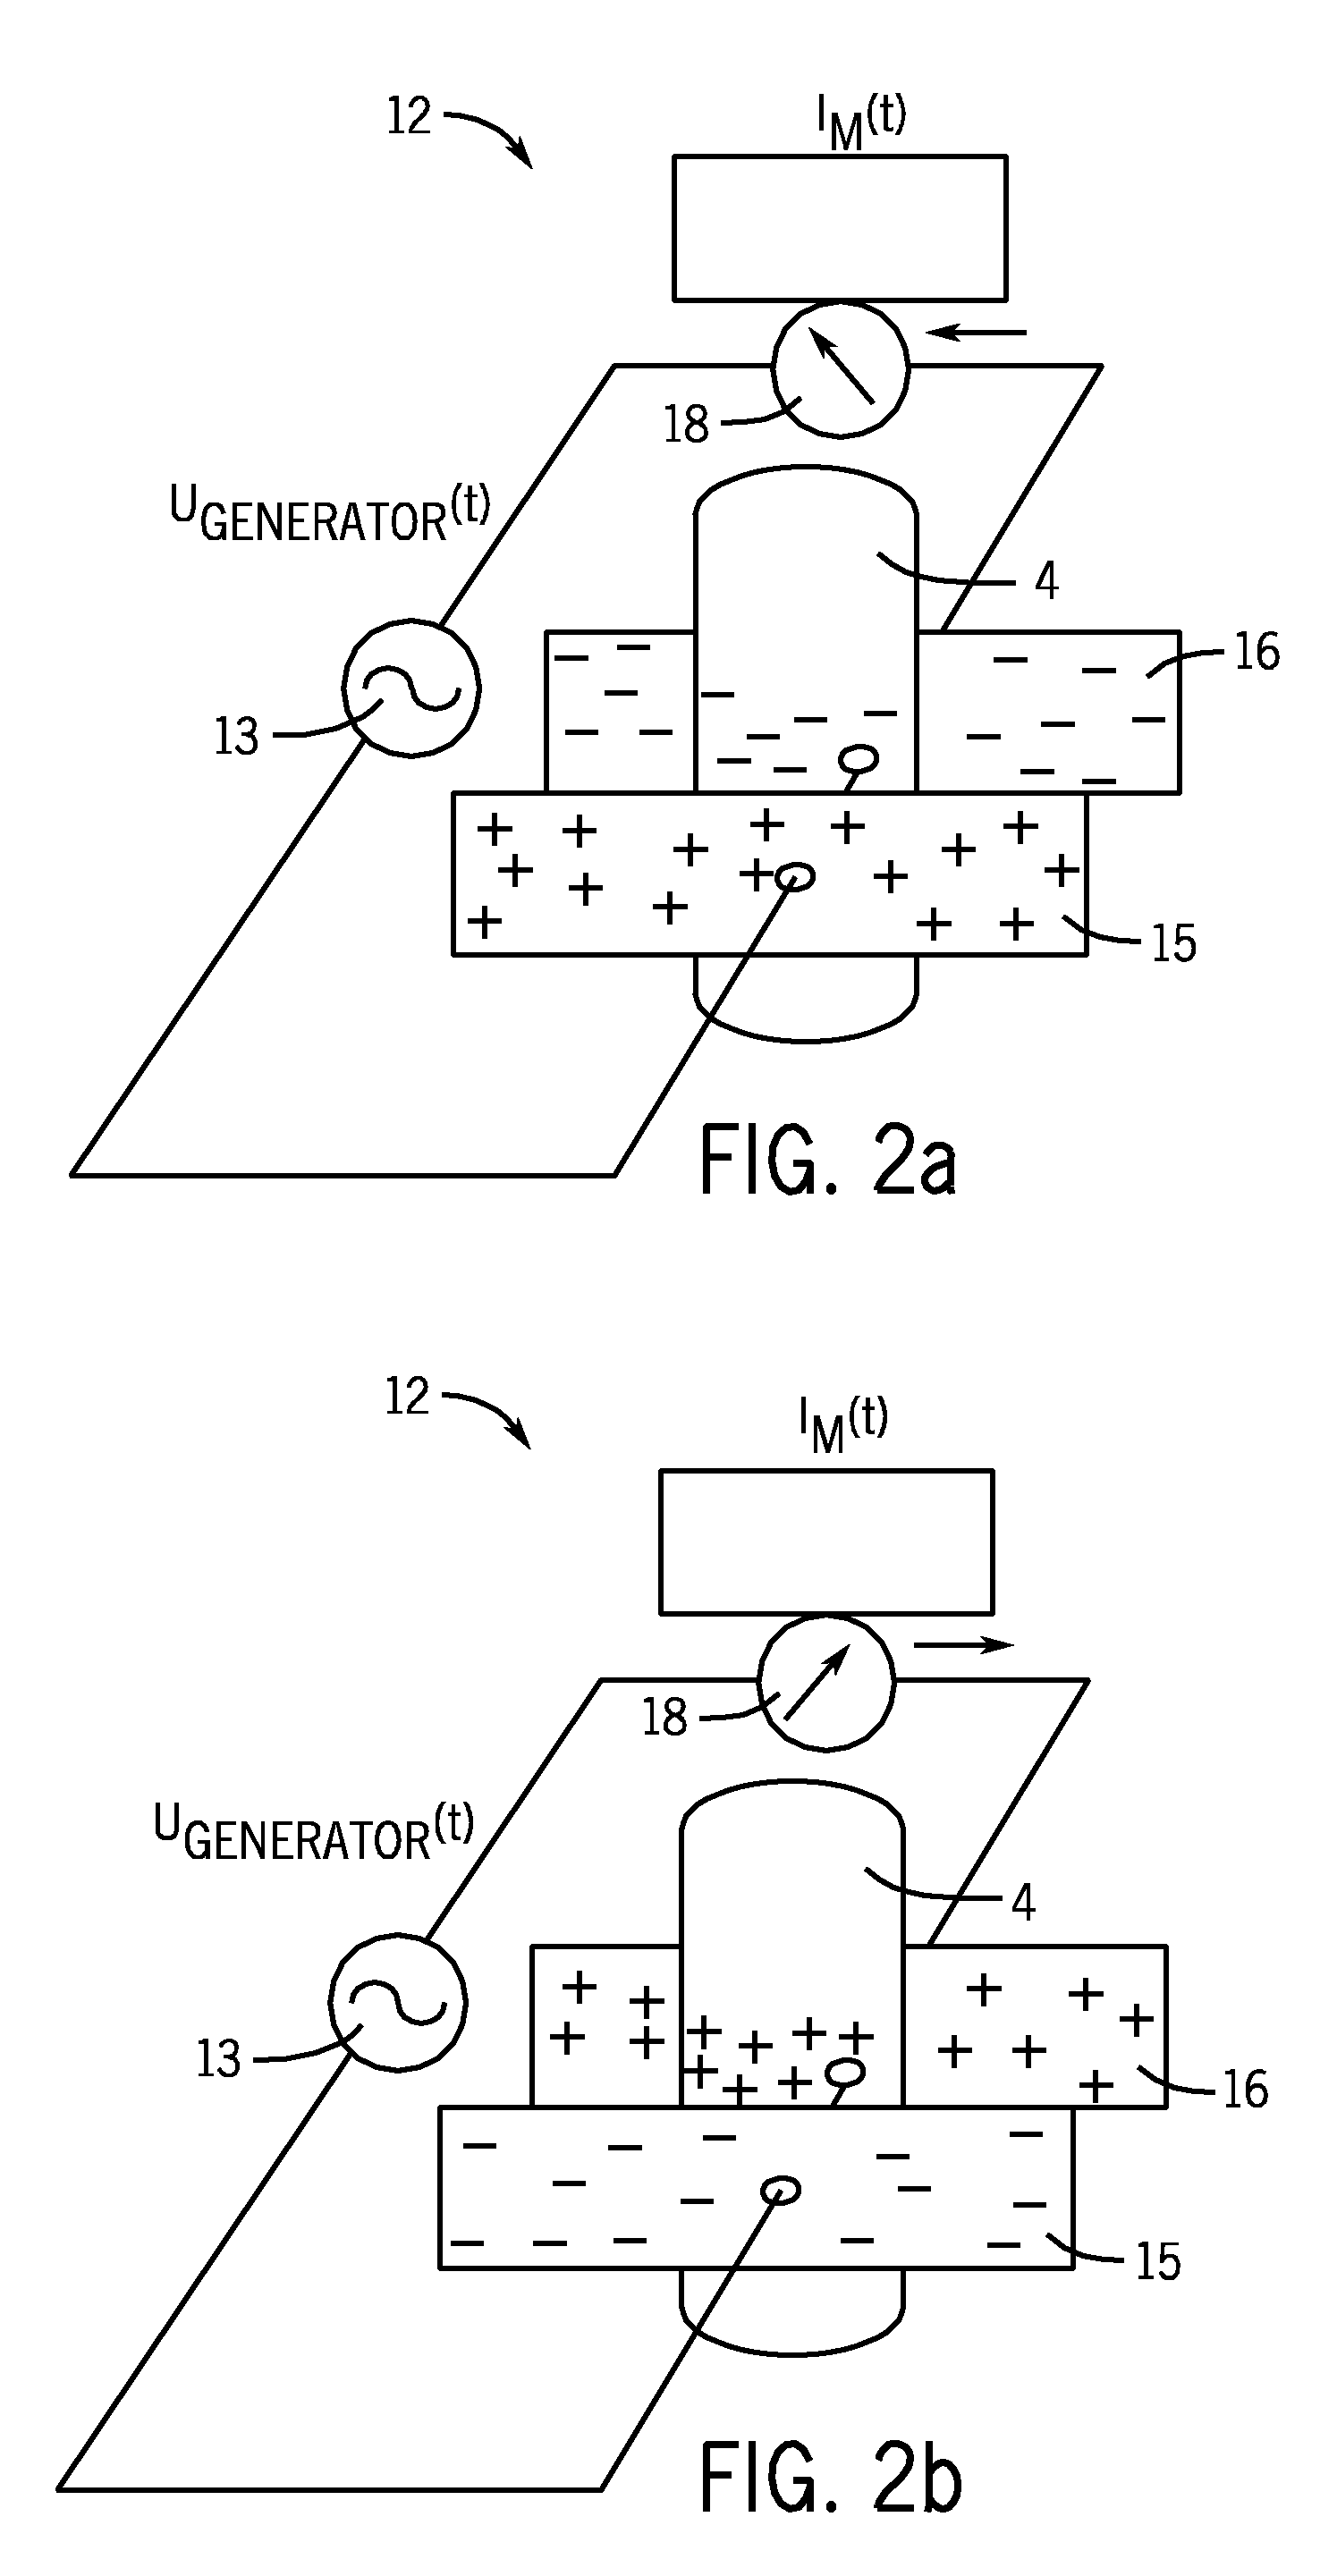 Device and Method for the Quantity-Controlled Filling of Containers with Powdered Substances